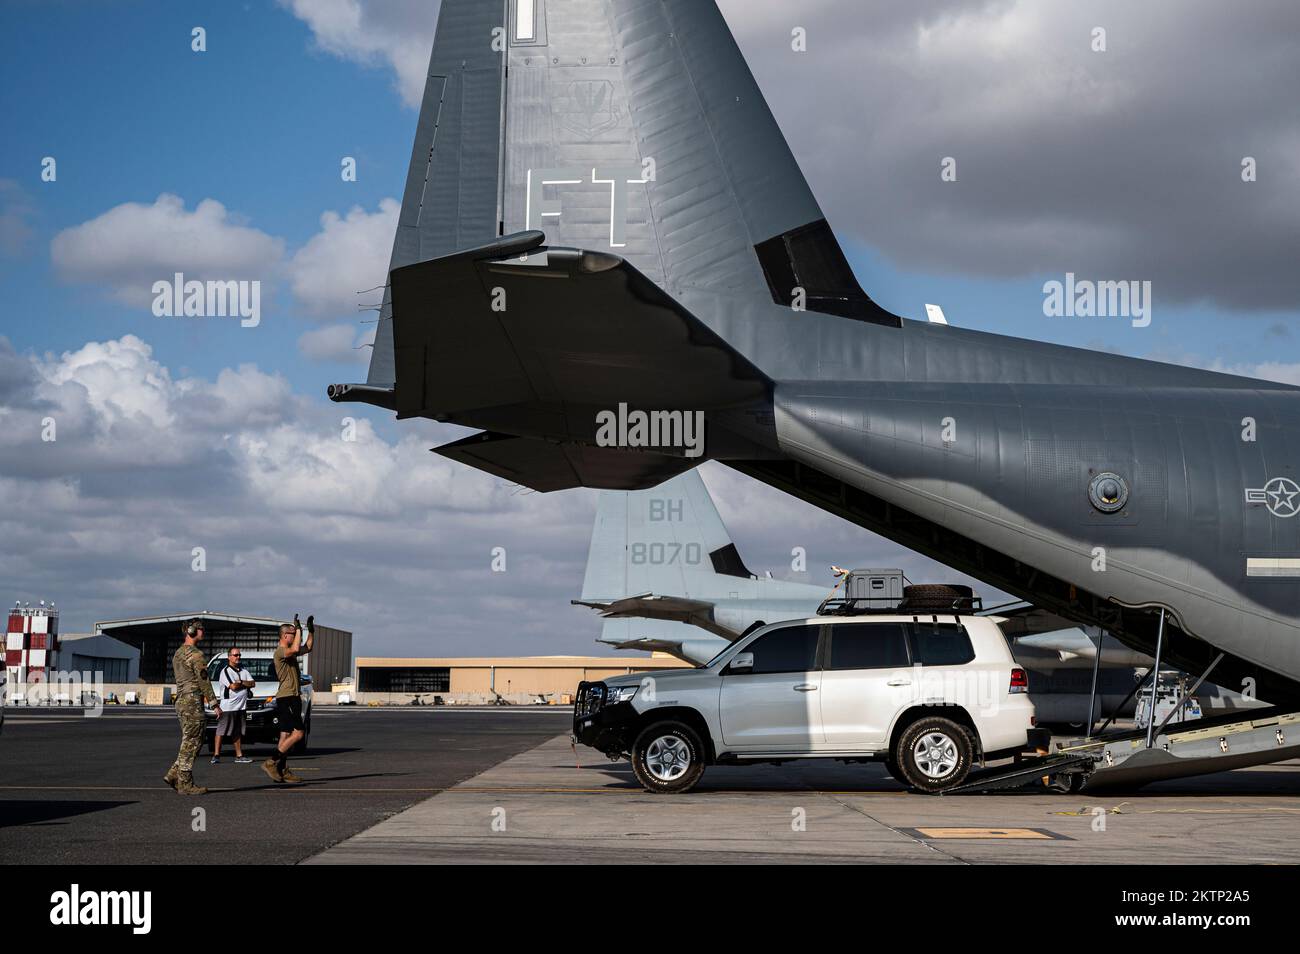 U.S. Airmen assigned to the 81st Expeditionary Rescue Squadron (ERQS) load a vehicle onto a HC-130J Combat King II on Camp Lemonnier, Djibouti, Oct. 16, 2022. The 81st ERQS is a rapidly deployable combat search and rescue force that can conduct tactical air refueling, airdrop and airland of personnel and/or equipment during day or night operations in support of combat personnel recovery within Combined Joint Task Force – Horn of Africa area of responsibility. (U.S. Air Force photo by Staff Sgt. Devin M. Rumbaugh) Stock Photo